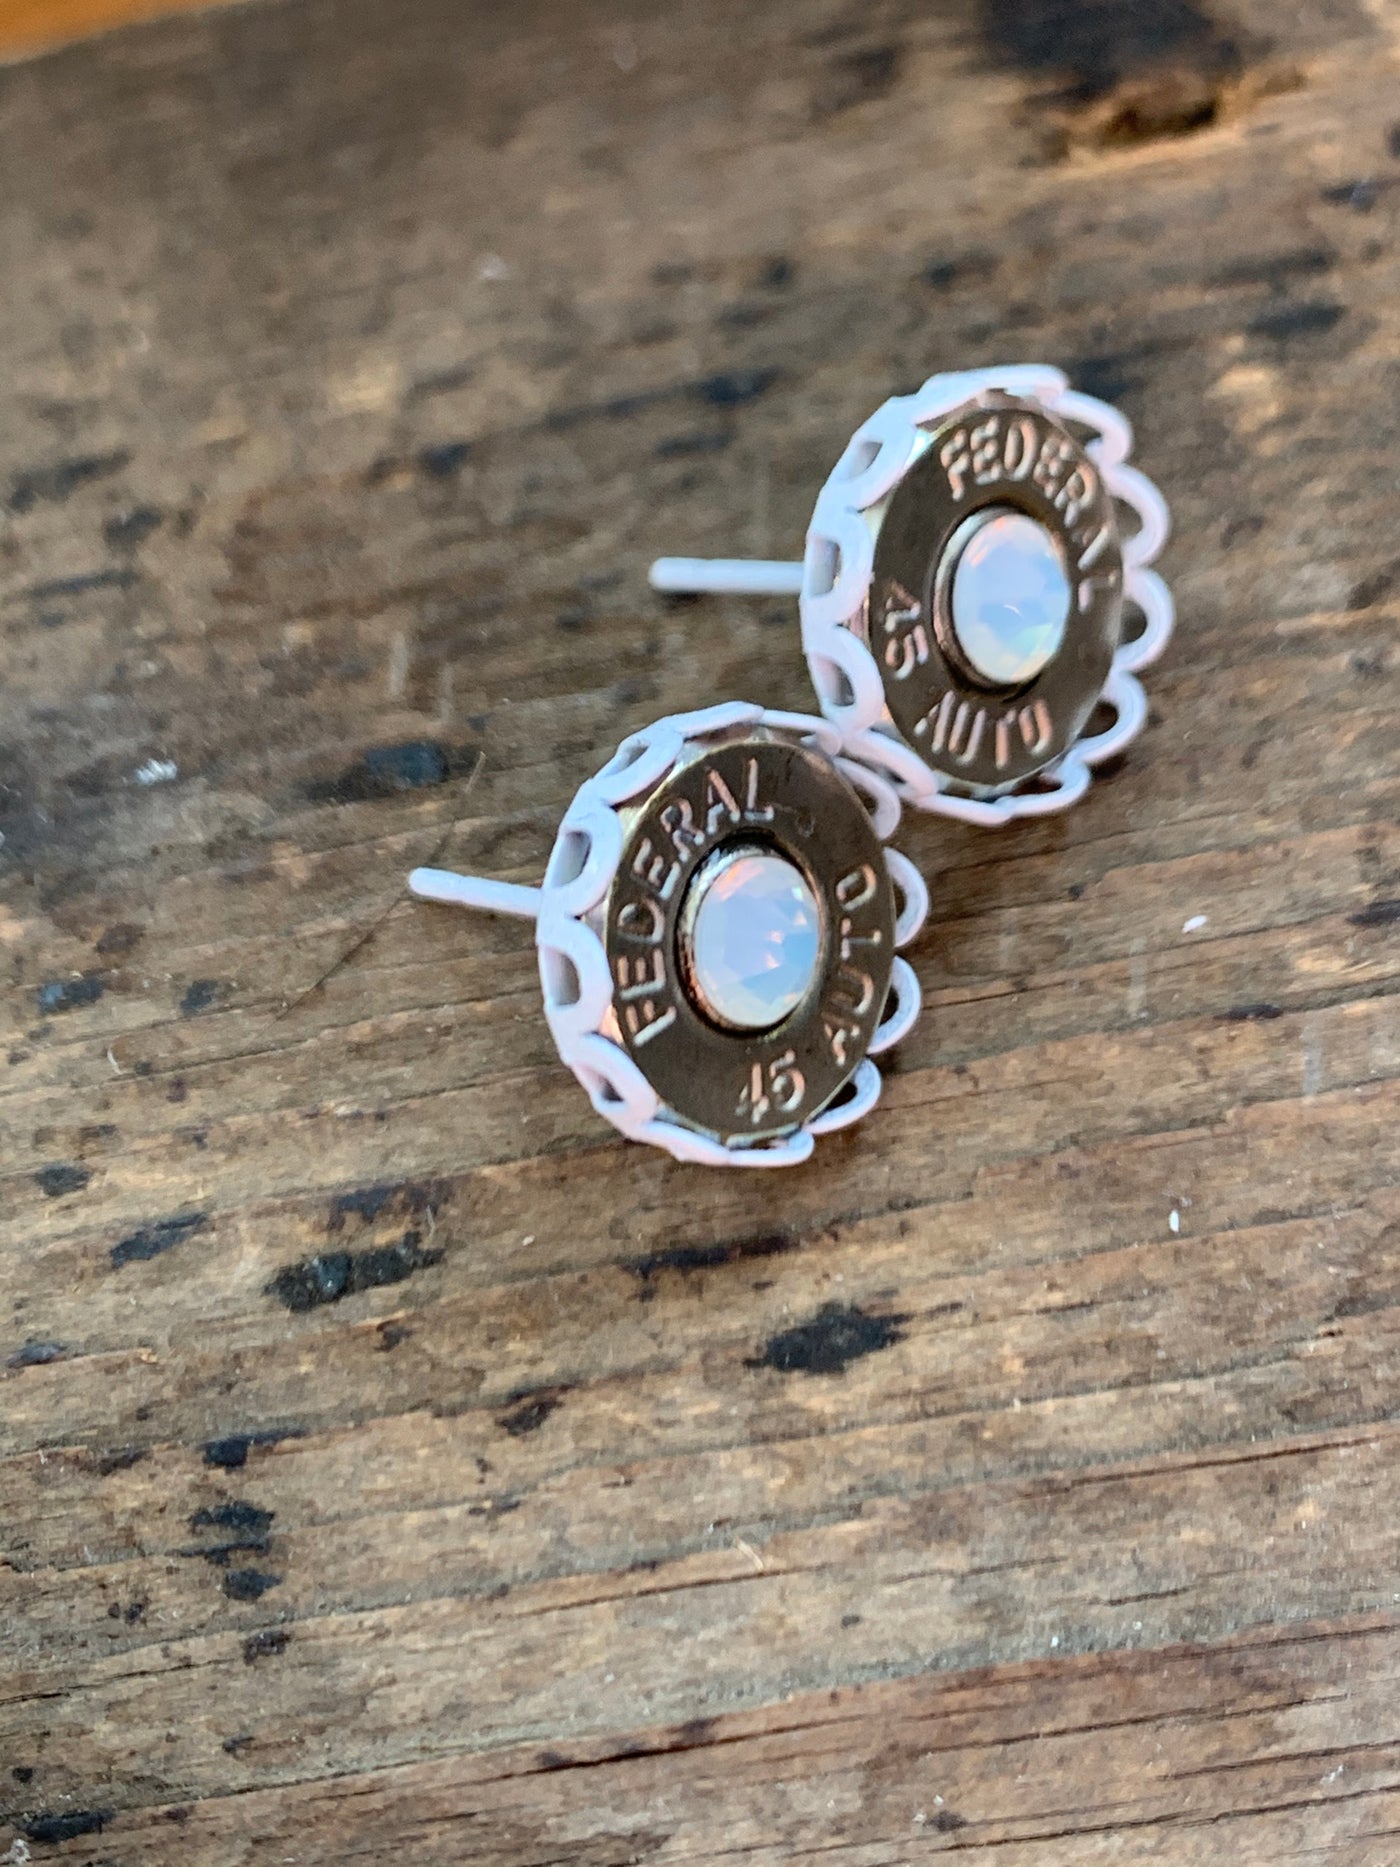 45 Auto Bullet Earrings with White Setting and Opal Crystal - Jill's Jewels | Unique, Handcrafted, Trendy, And Fun Jewelry